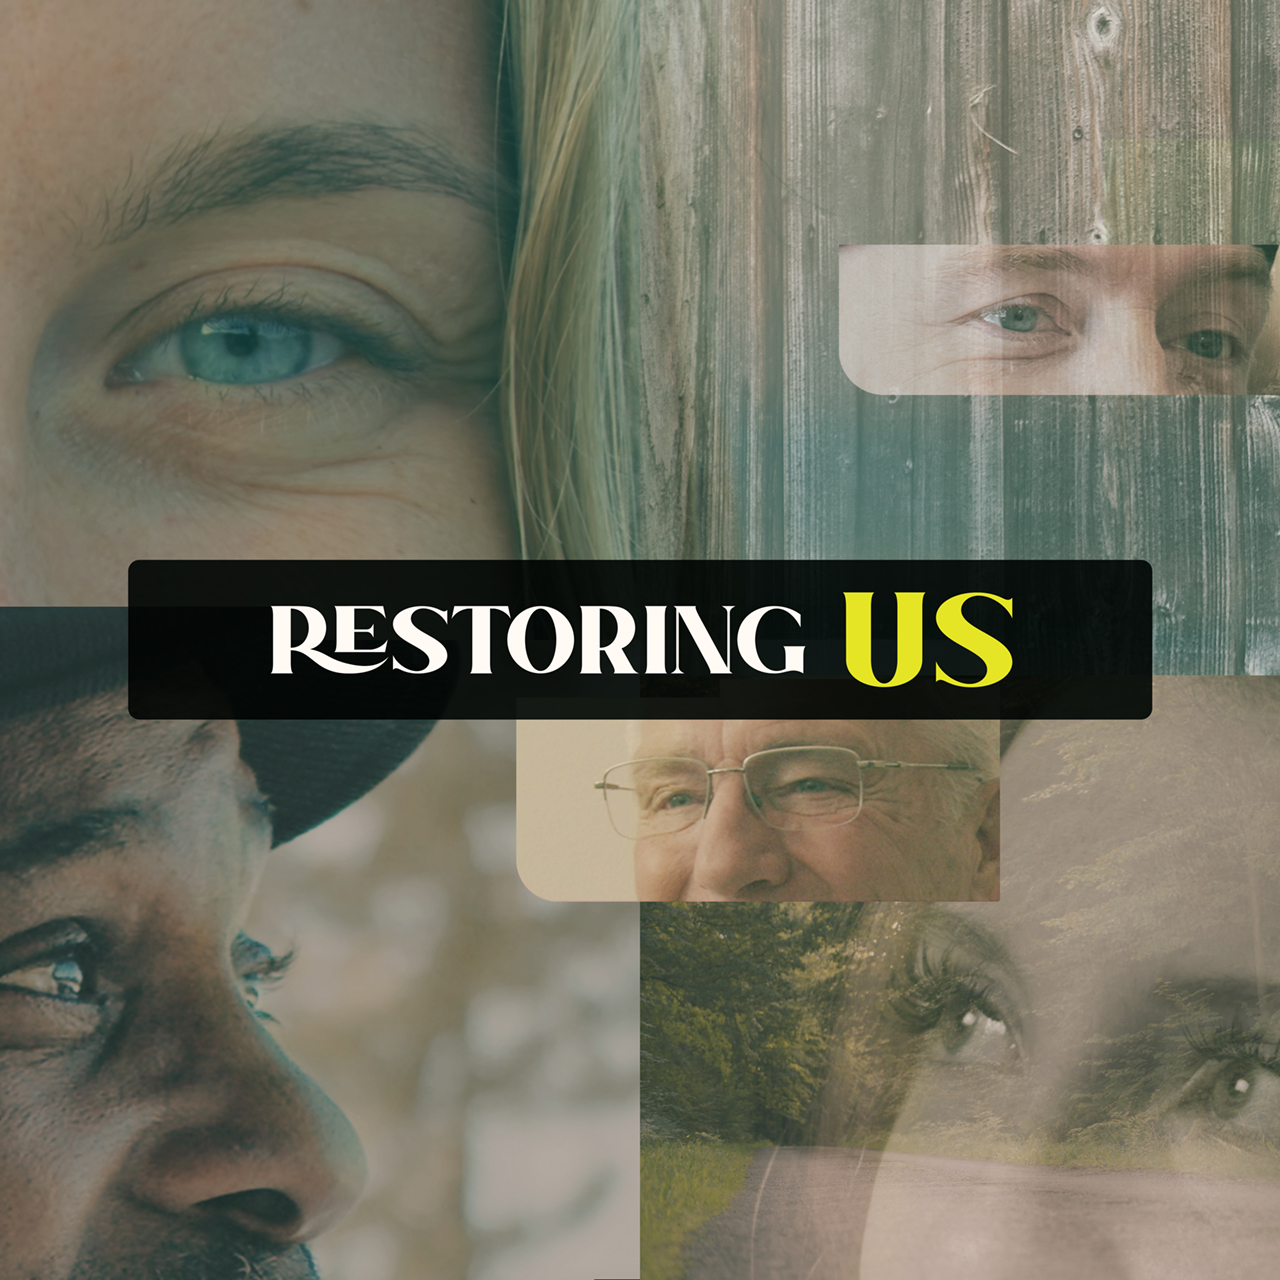 Restoring Us: Why Did I Say That?